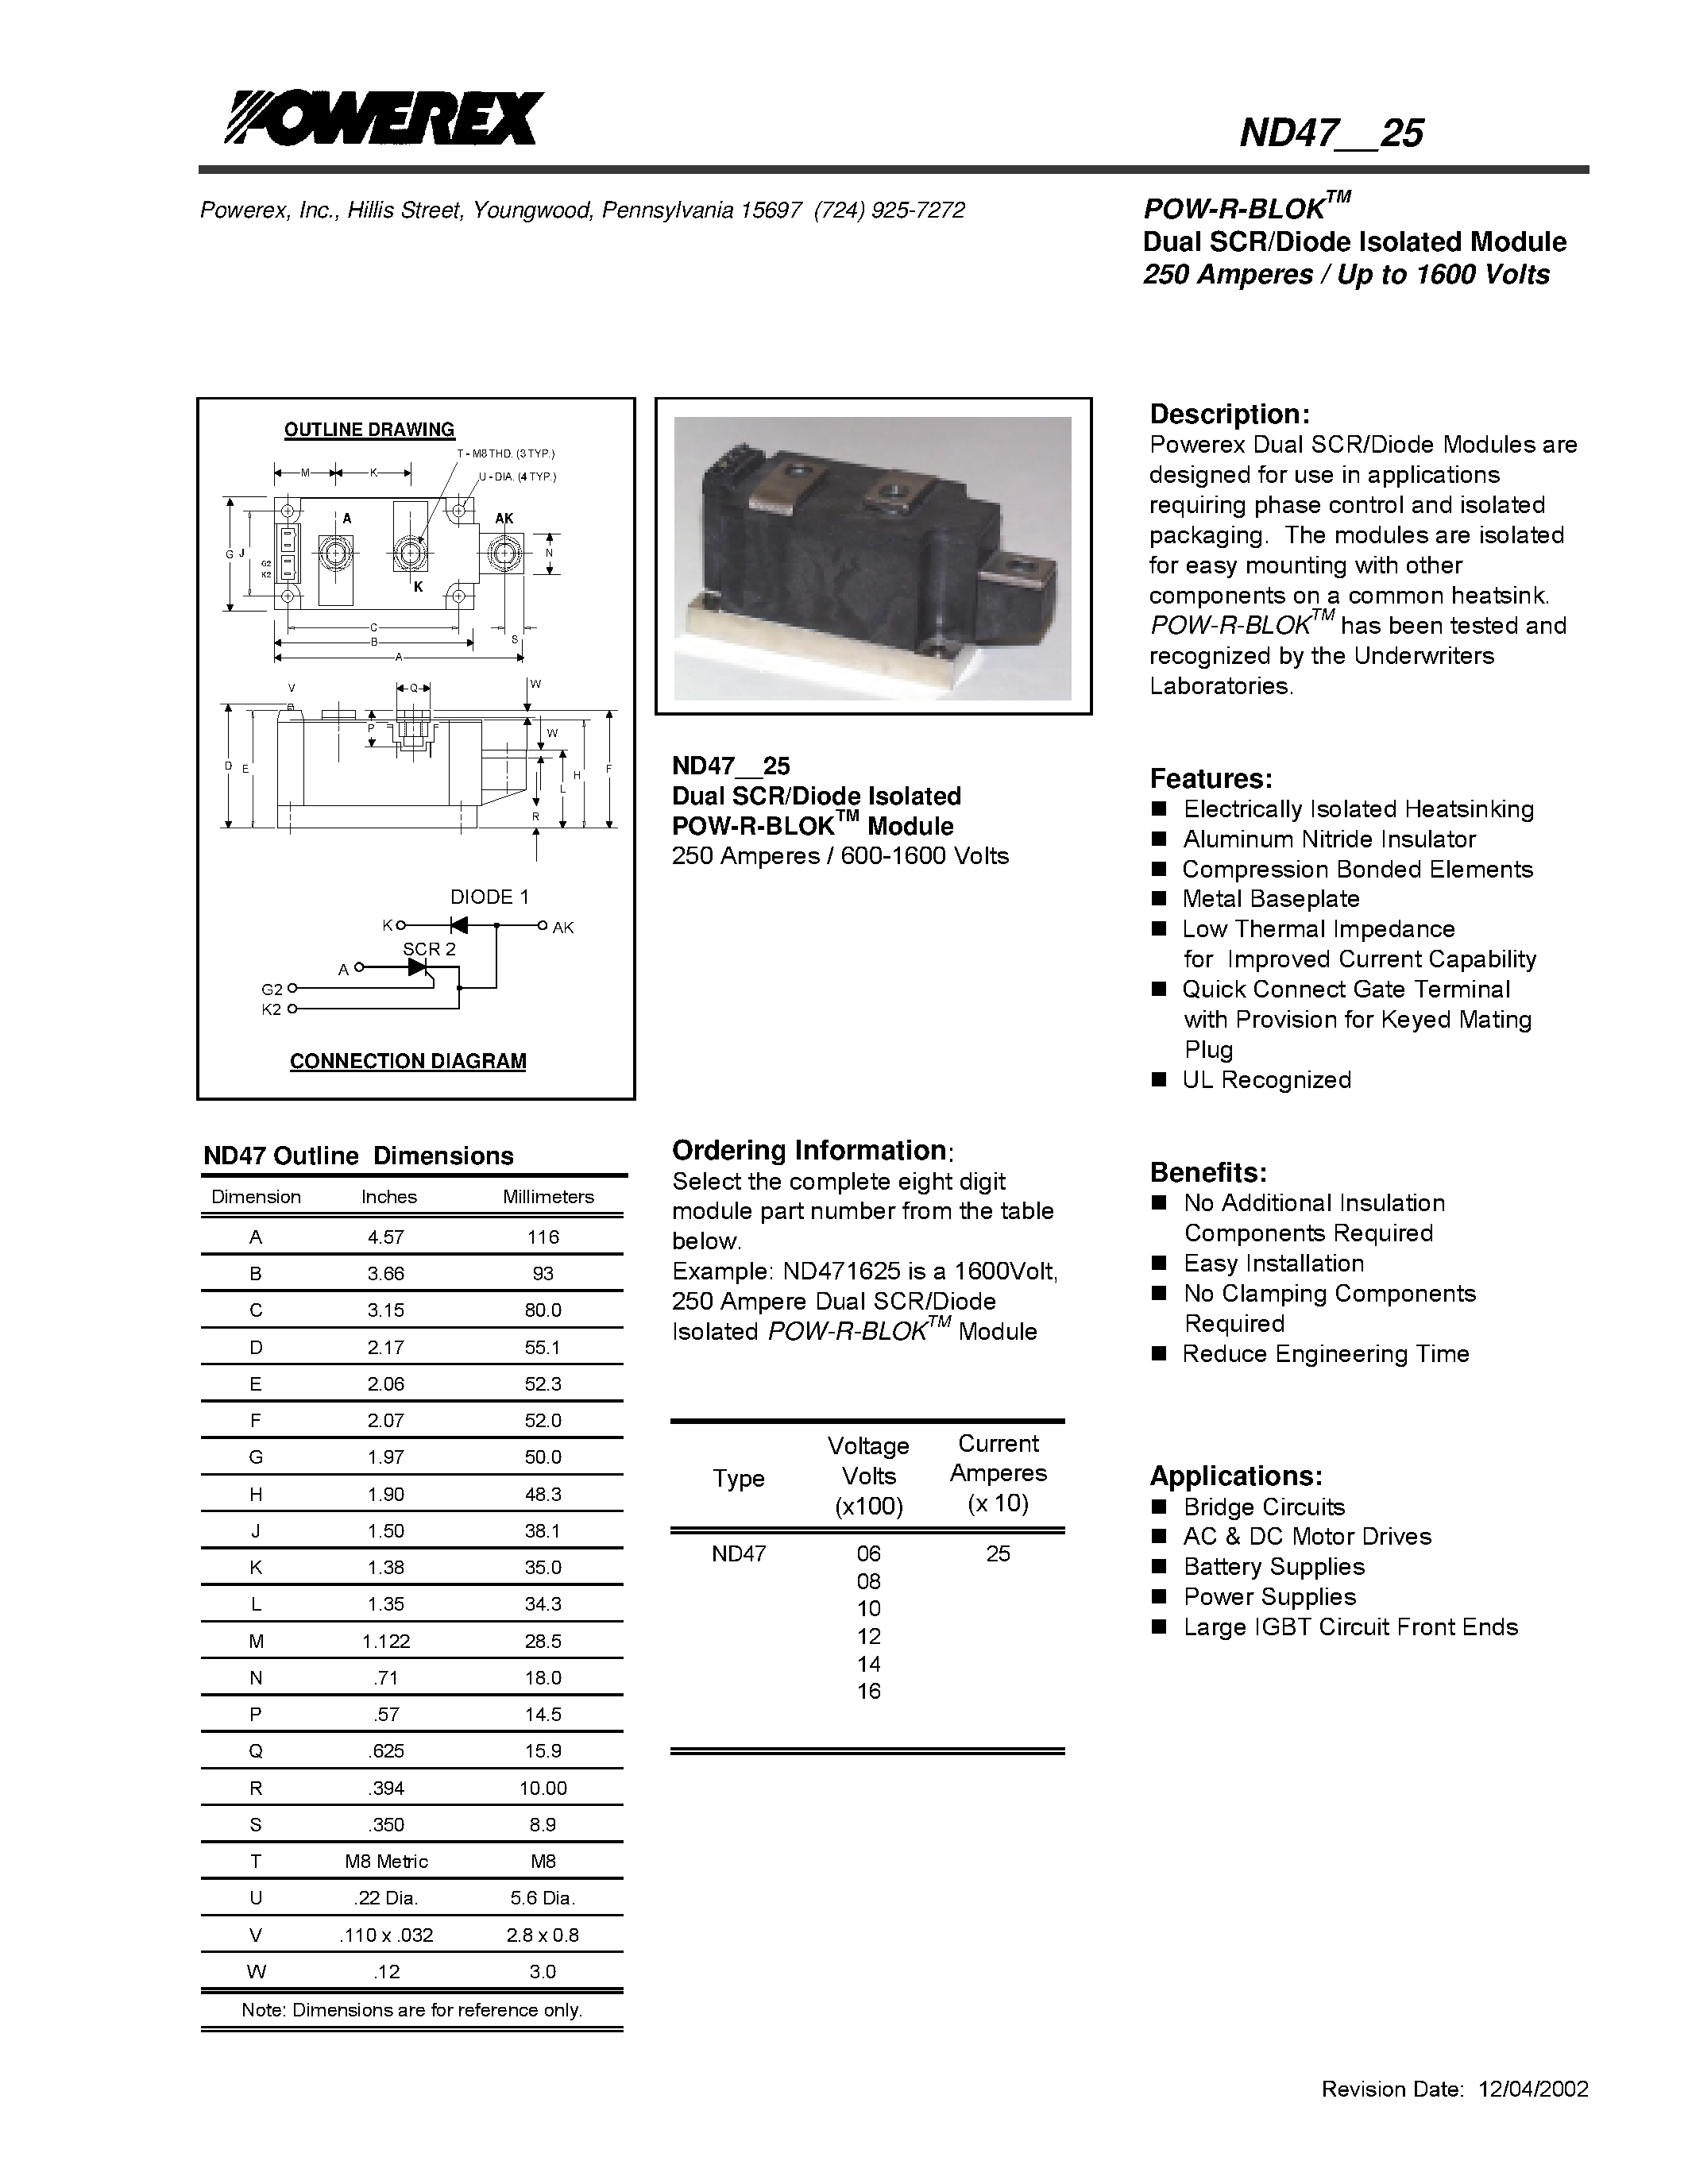 Datasheet ND470825 - POW-R-BLOK Dual SCR/Diode Isolated Module (250 Amperes / Up to 1600 Volts) page 1